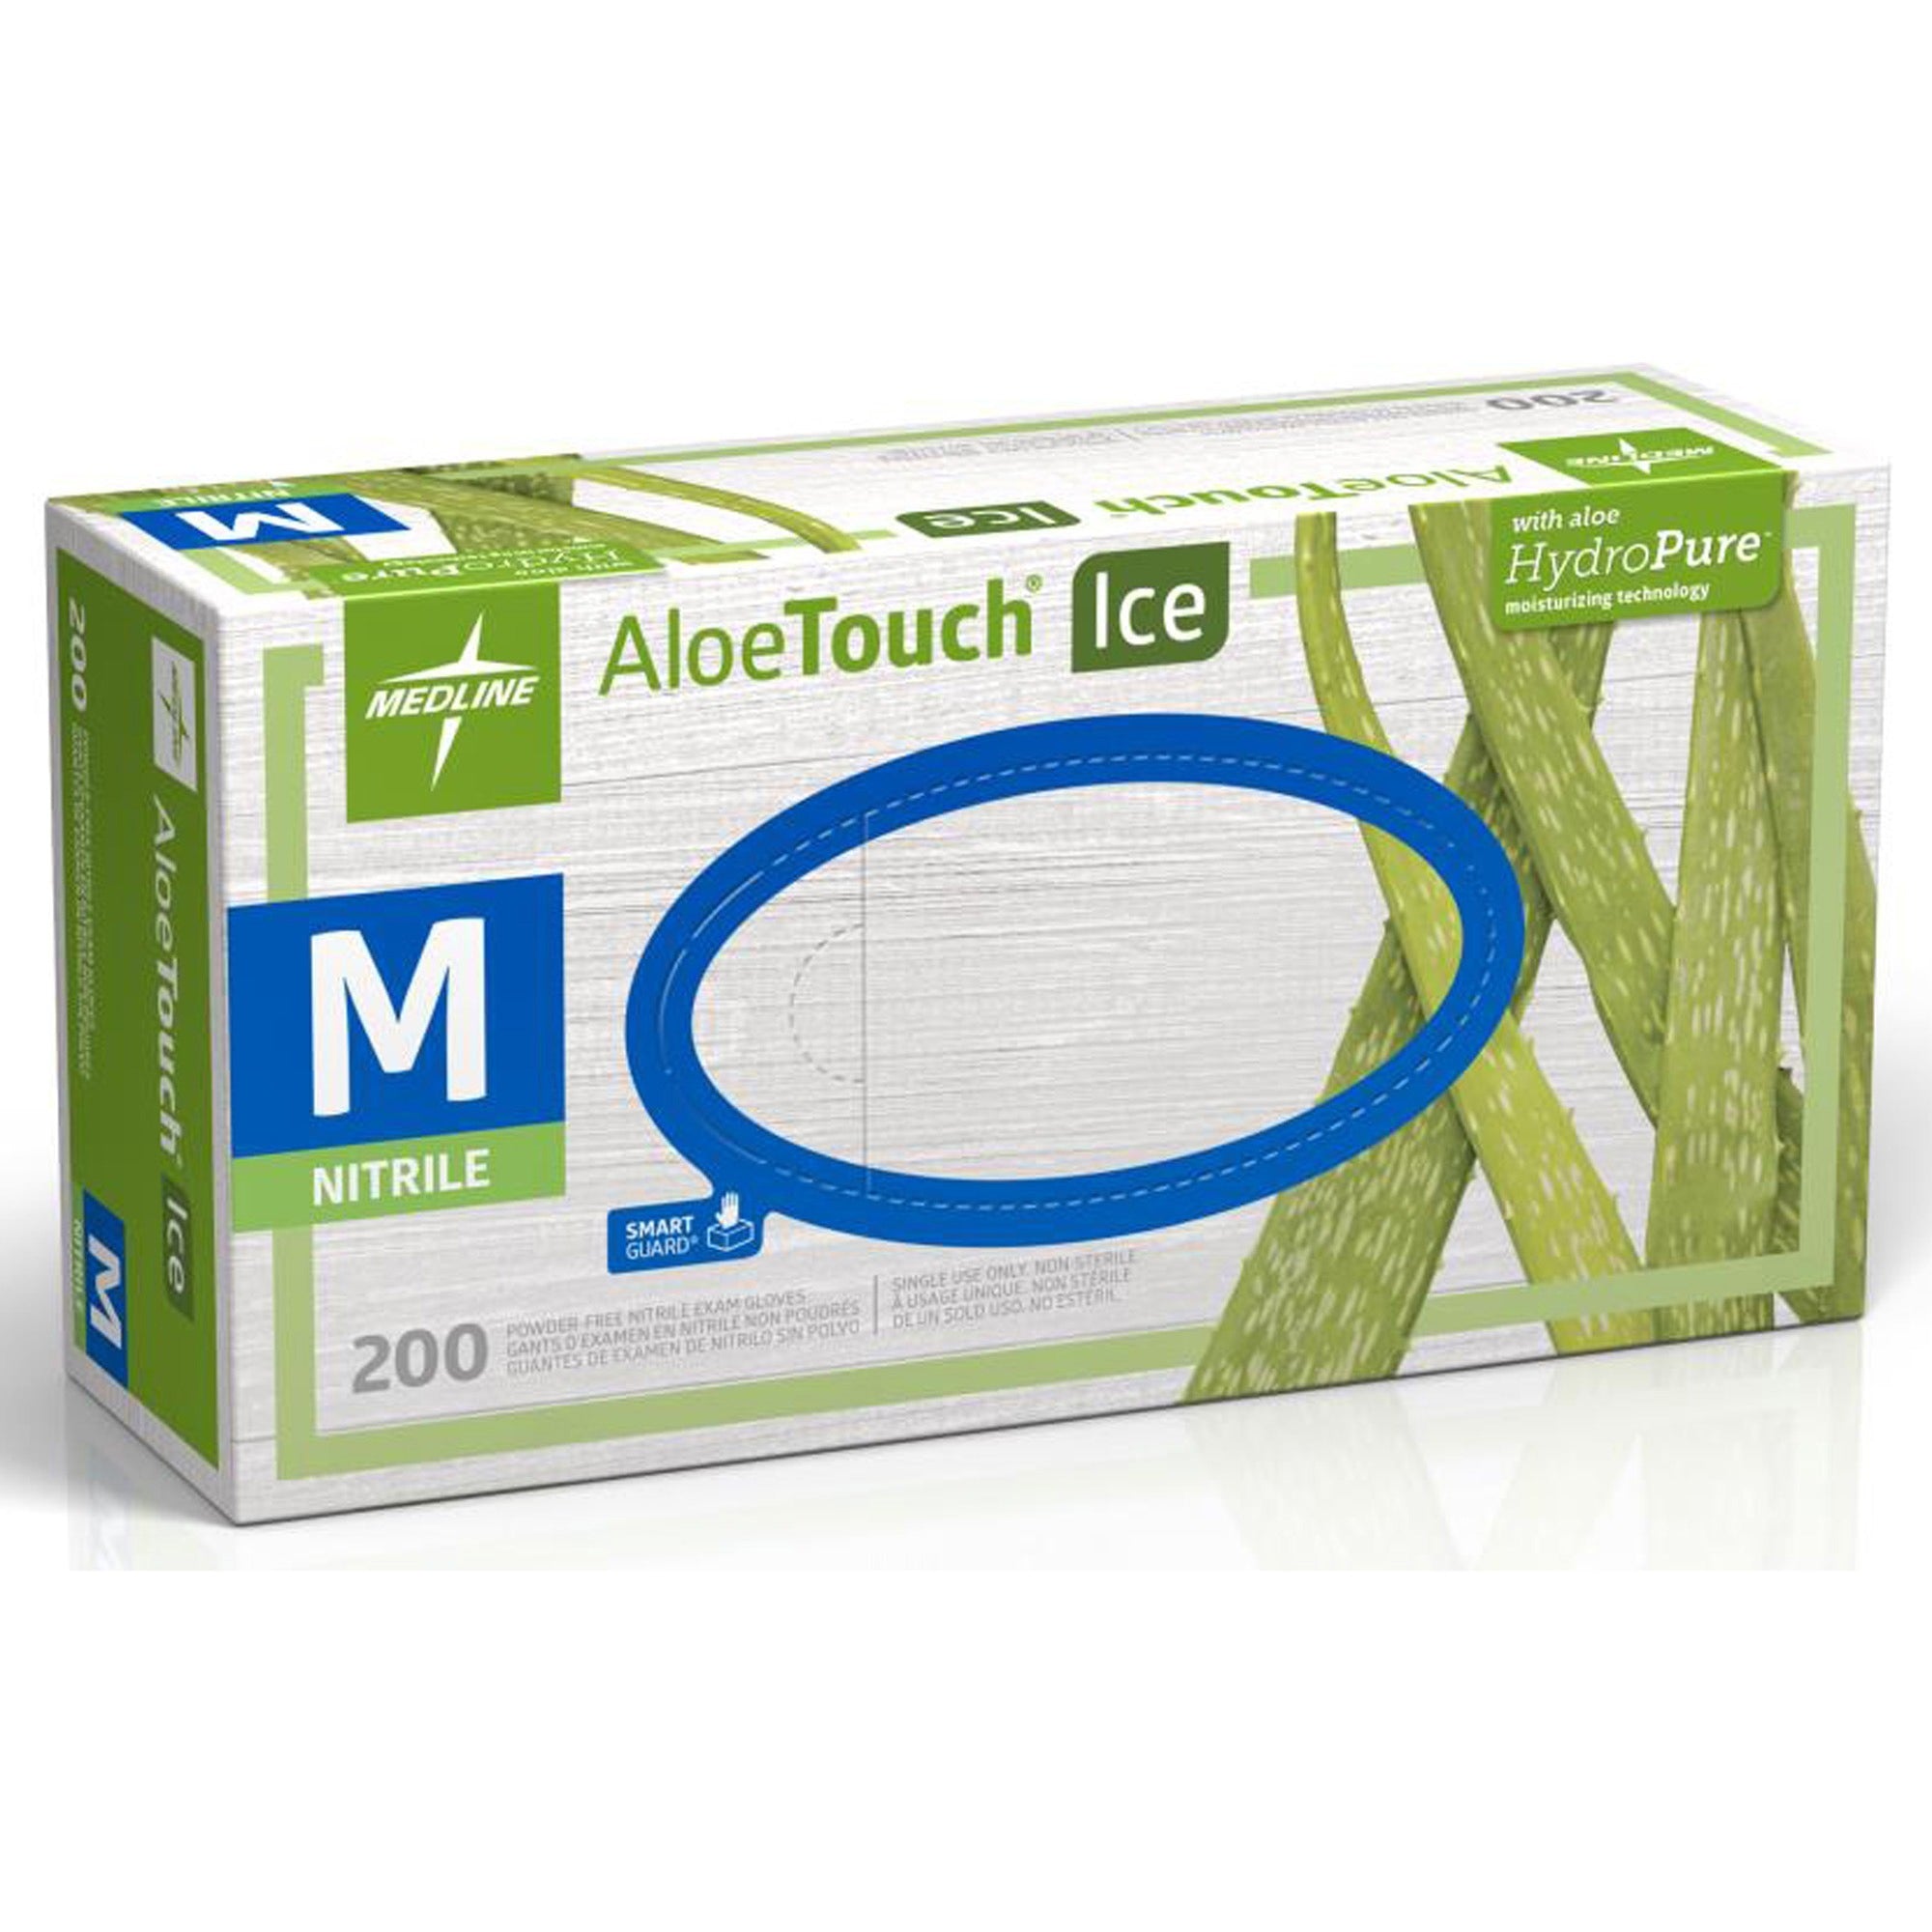 Medline Aloetouch Ice Nitrile Gloves - Medium Size - Latex-free, Textured - For Healthcare Working - 200 / Box - 